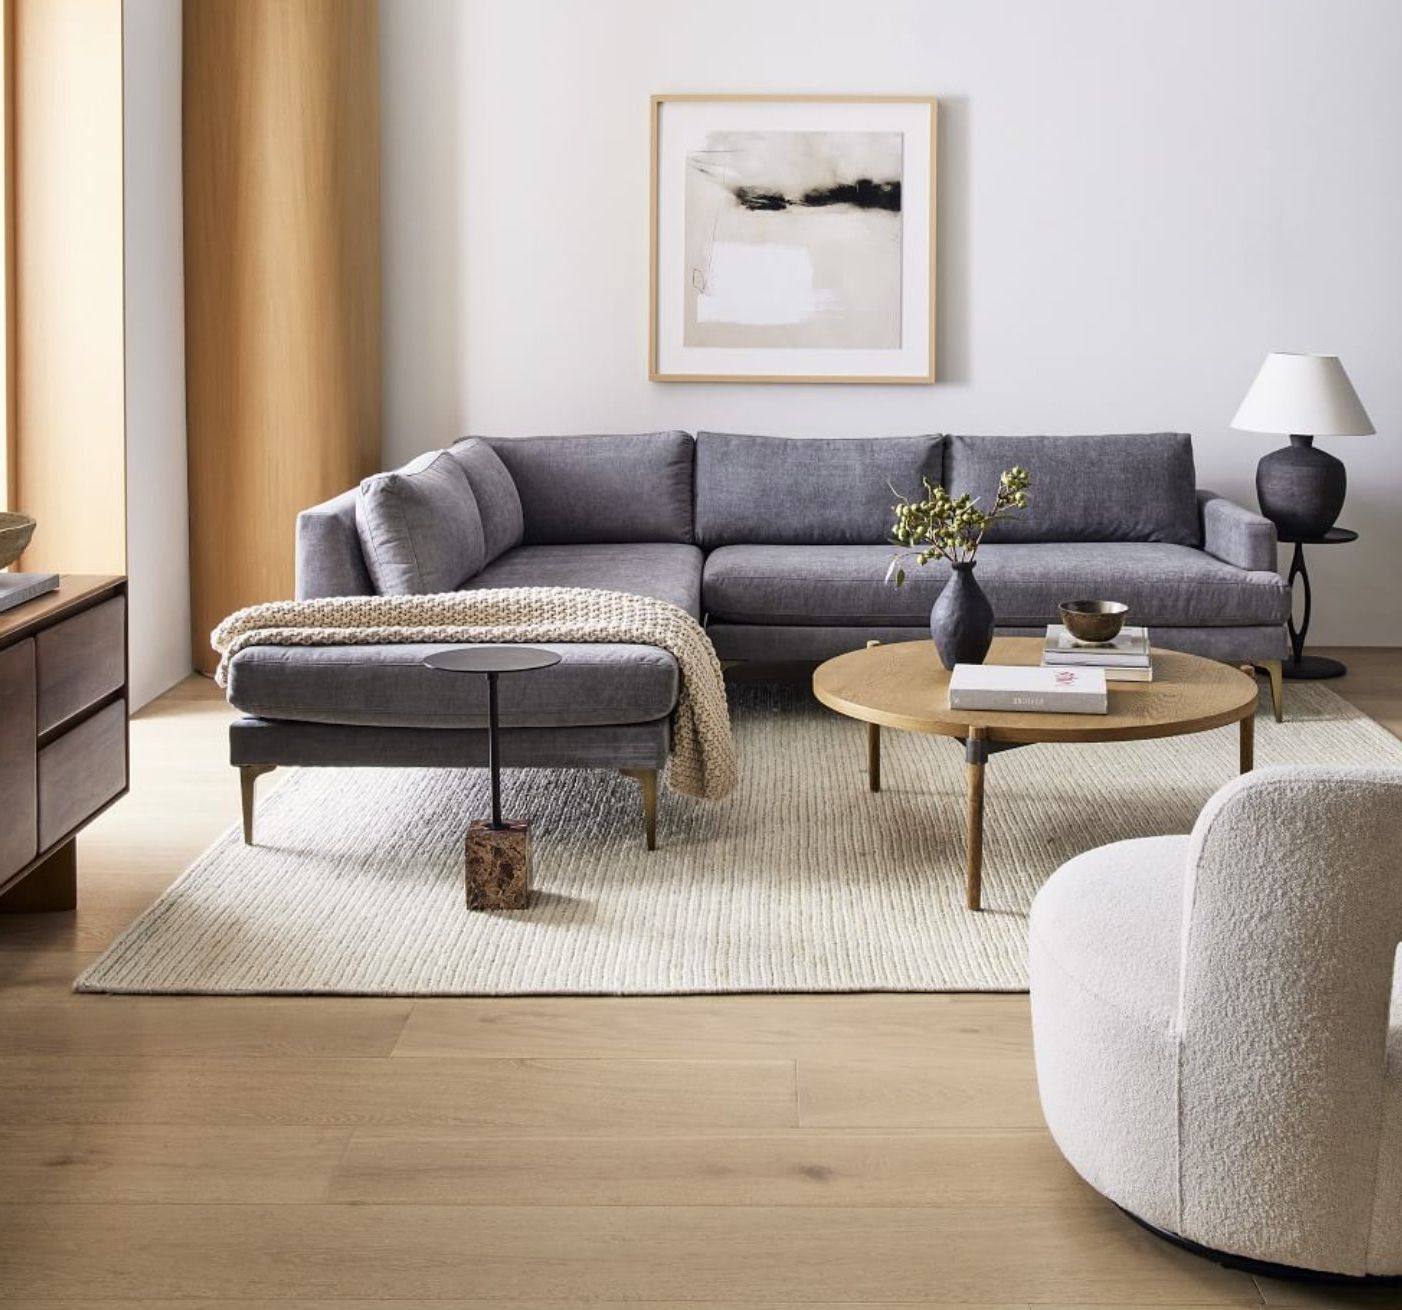 26 Amazing Sofas With Chaise Lounge – Happily Inspired In Sofas With Double Chaises (Gallery 17 of 20)